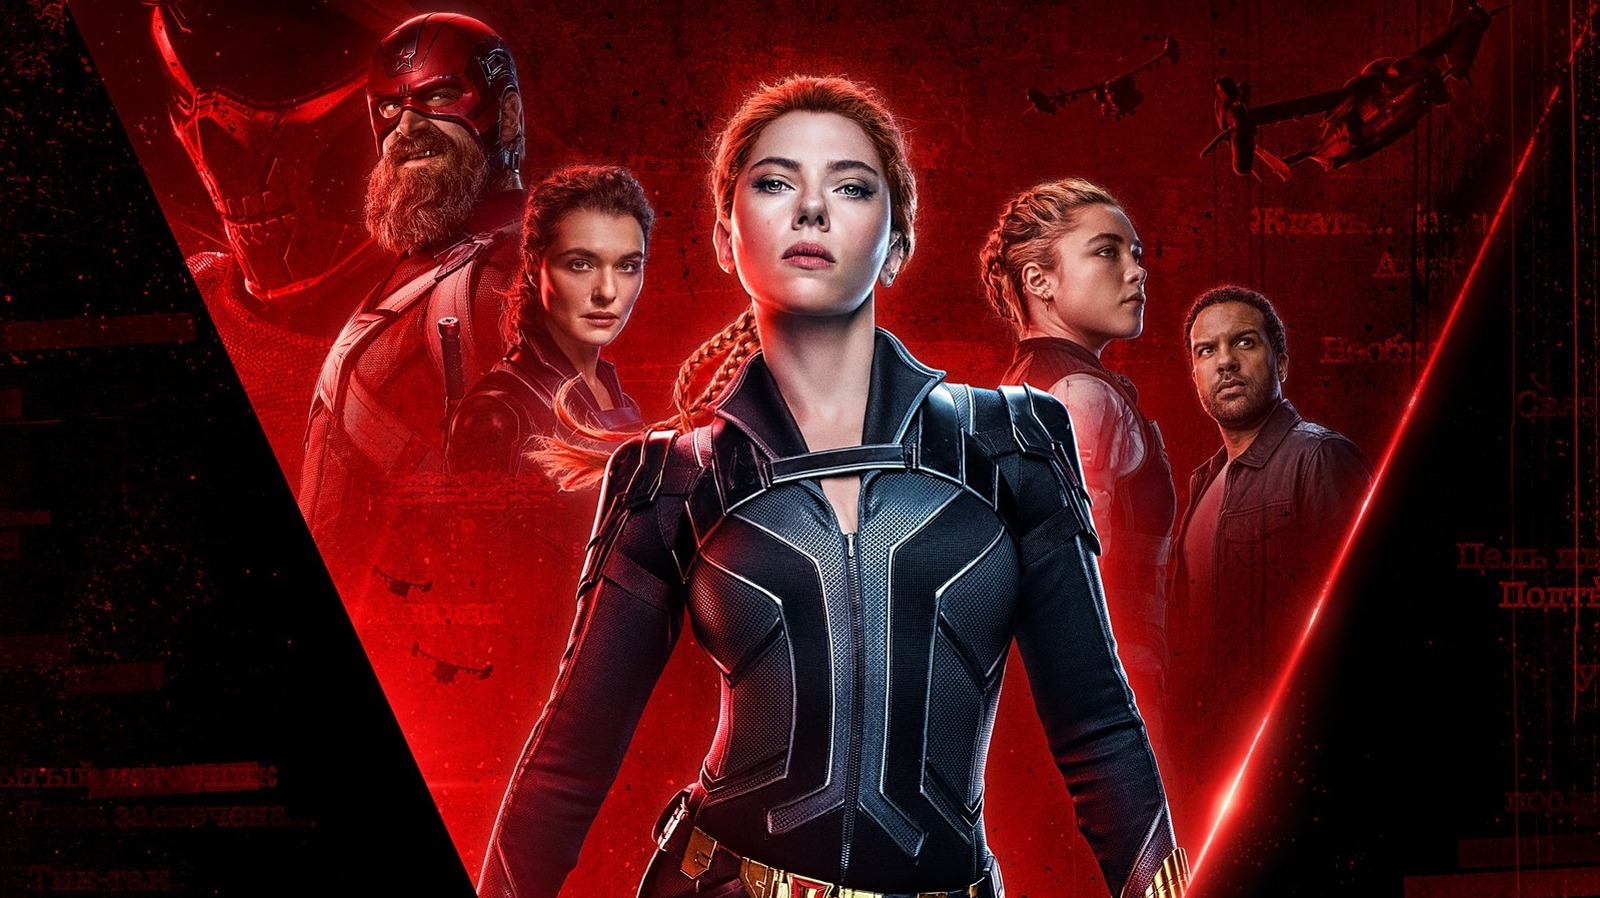 Netflix's Thunder Force promises to right the wrong of Endgame